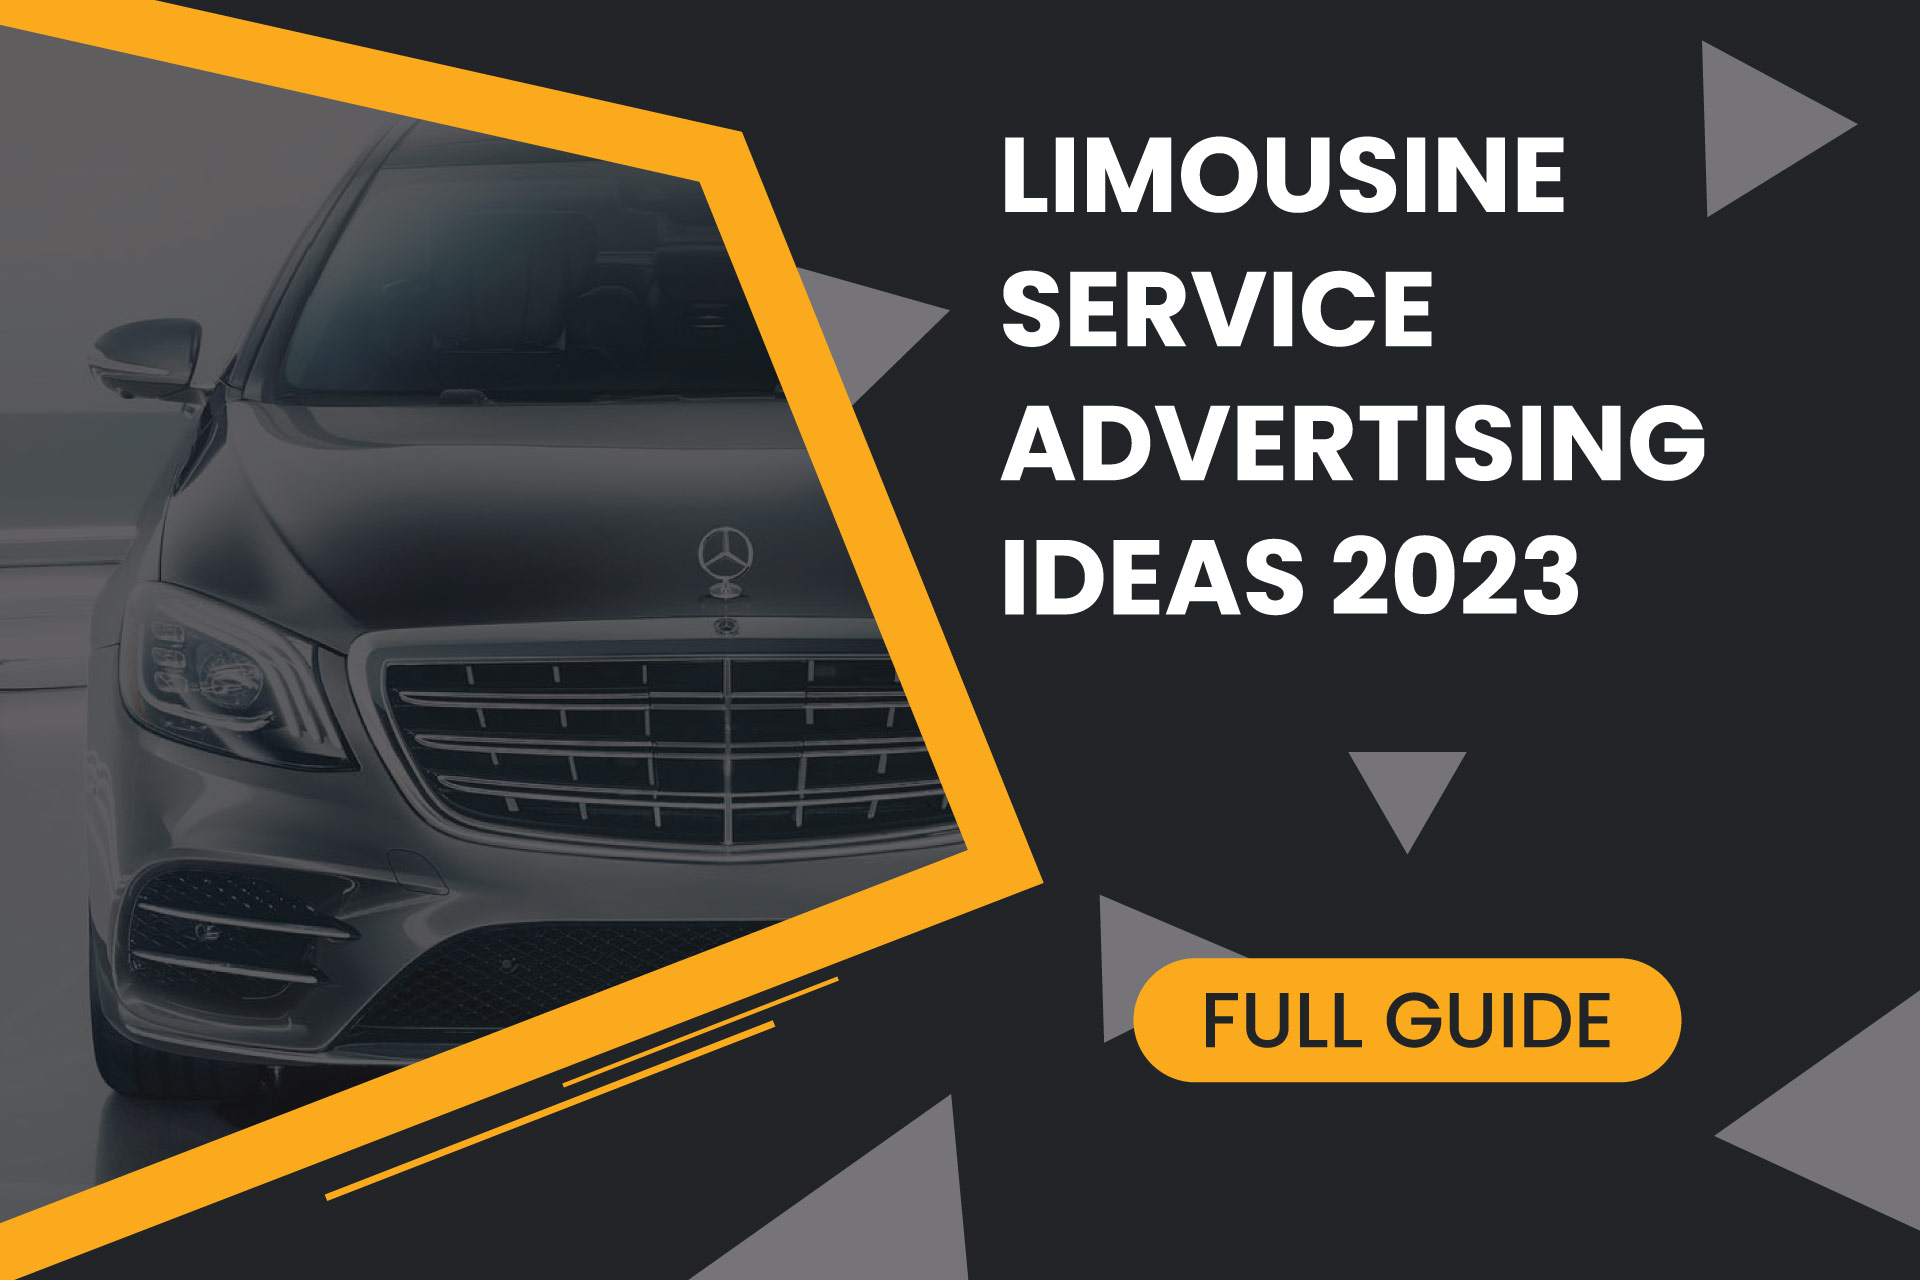 How to Advertise a Limo Service?